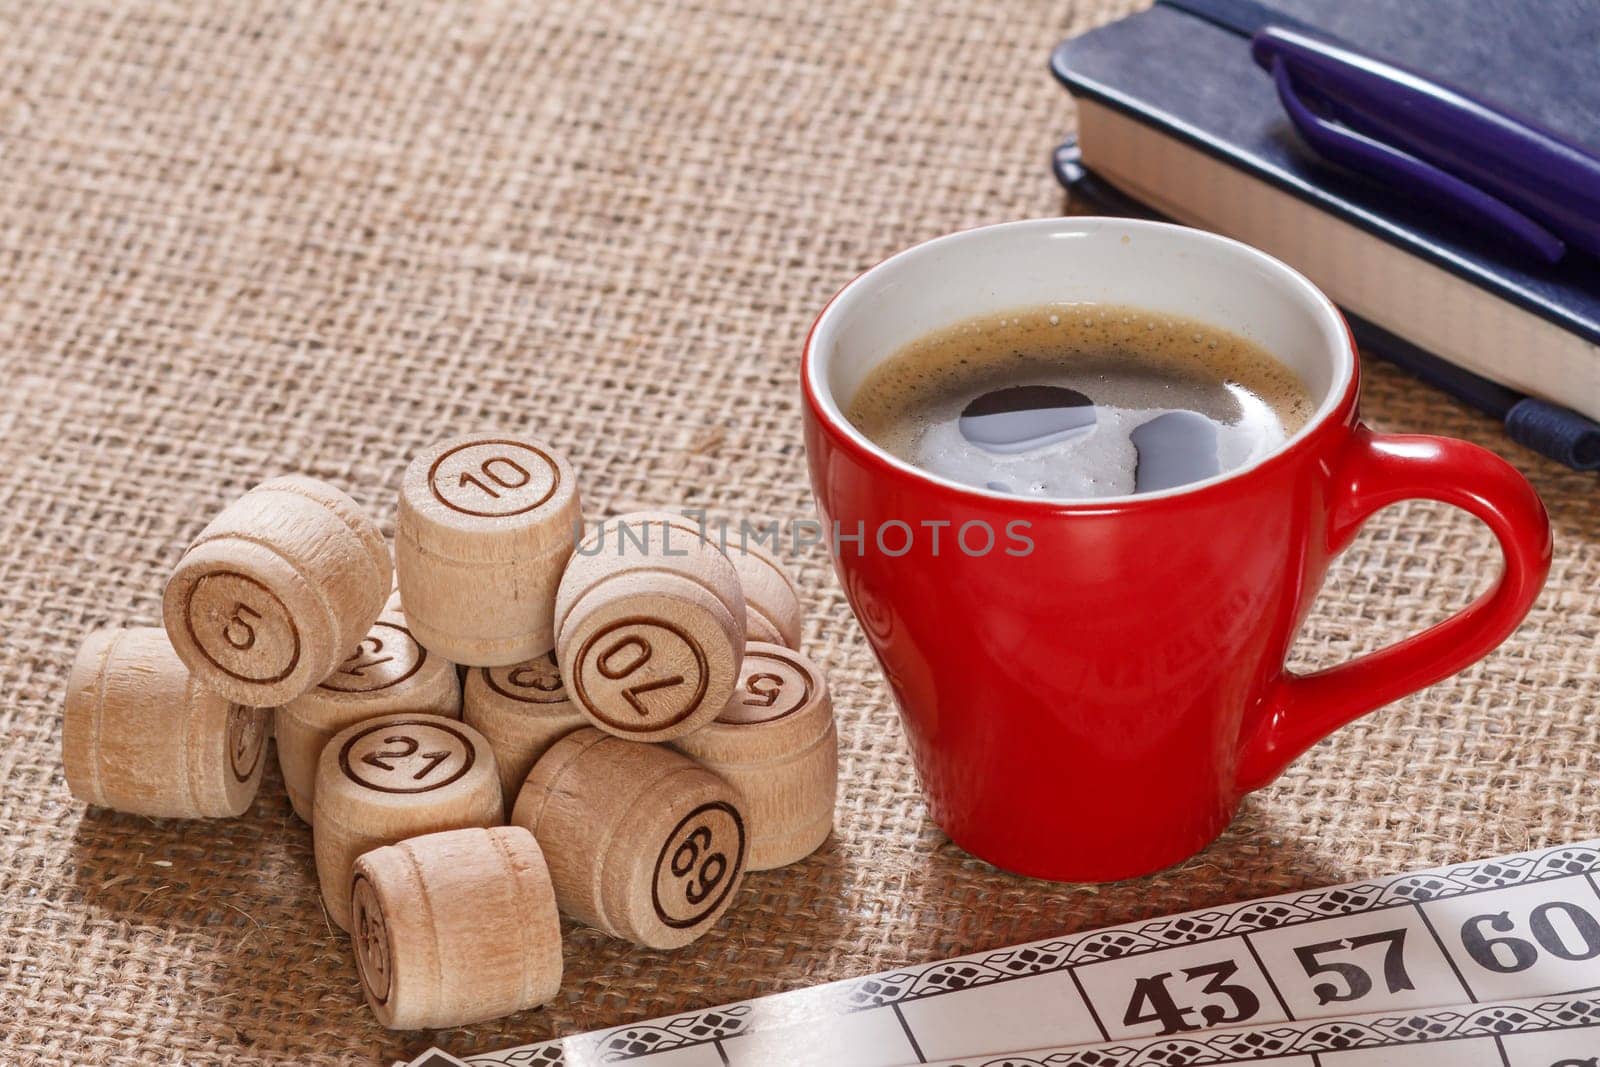 Board game lotto on sackcloth. Wooden lotto barrels and game cards for a game in lotto with cup of coffee and notebook with pen on the background.